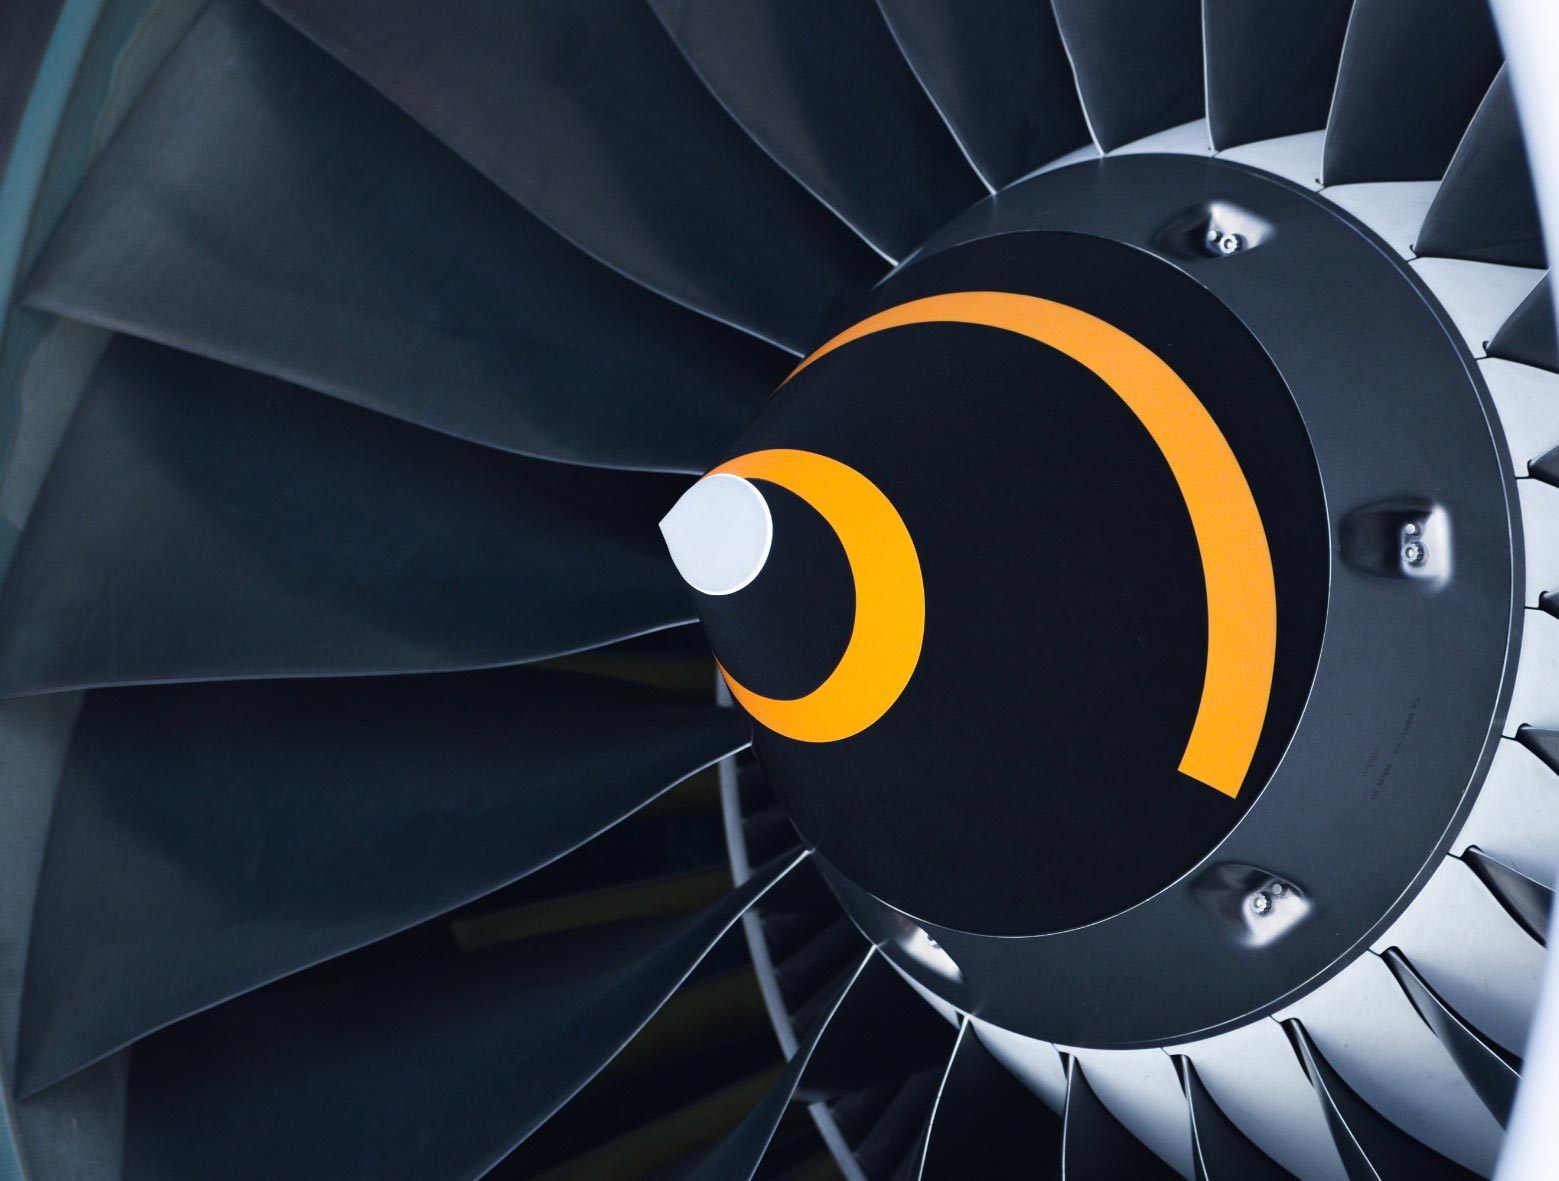 A close-up of a jet engine featuring a yellow and black circle.